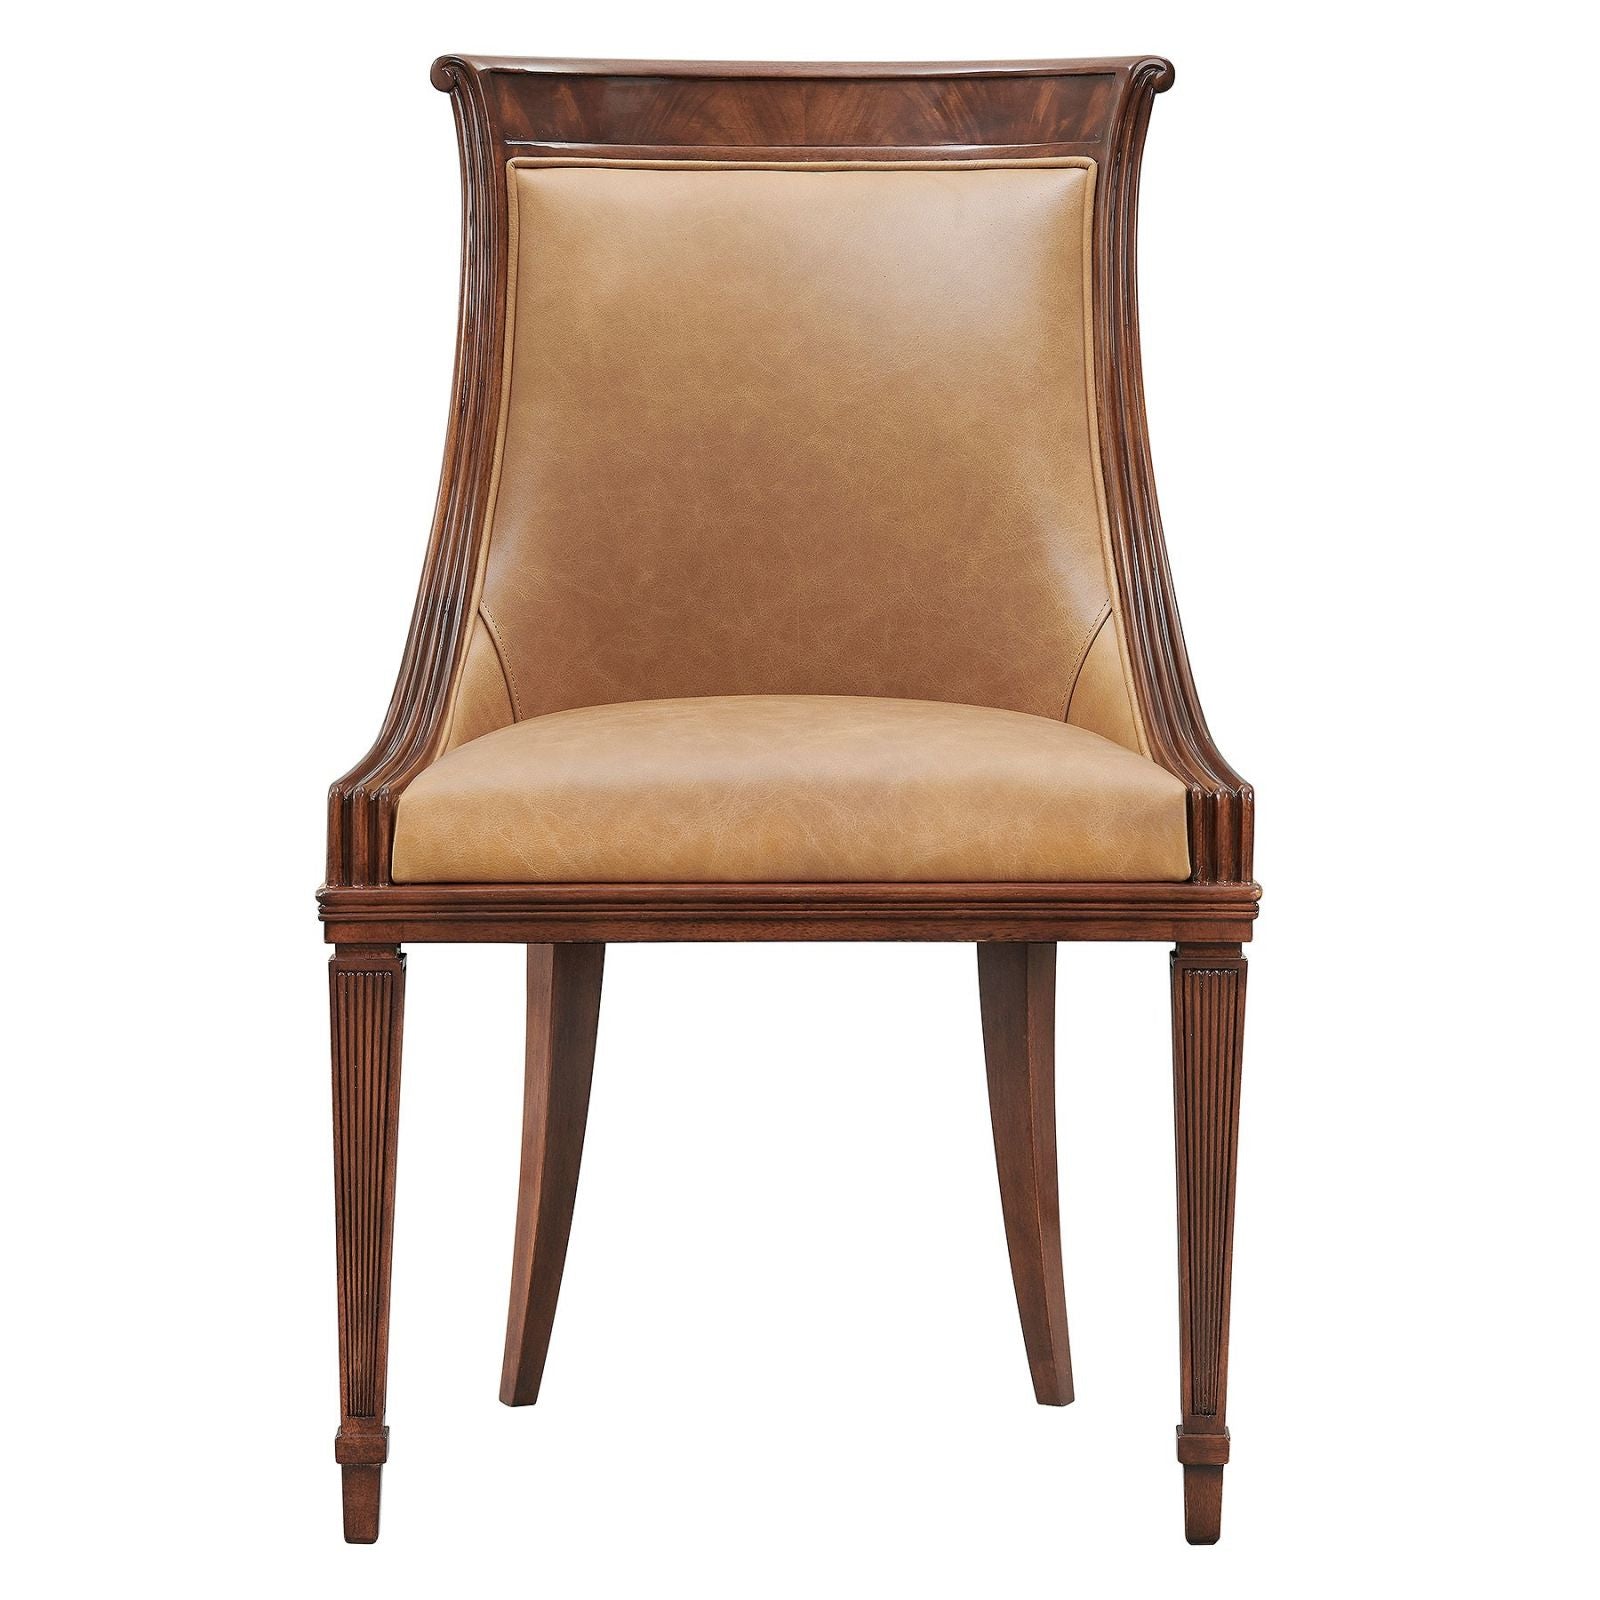 Scoop back crotch mahogany dining chair